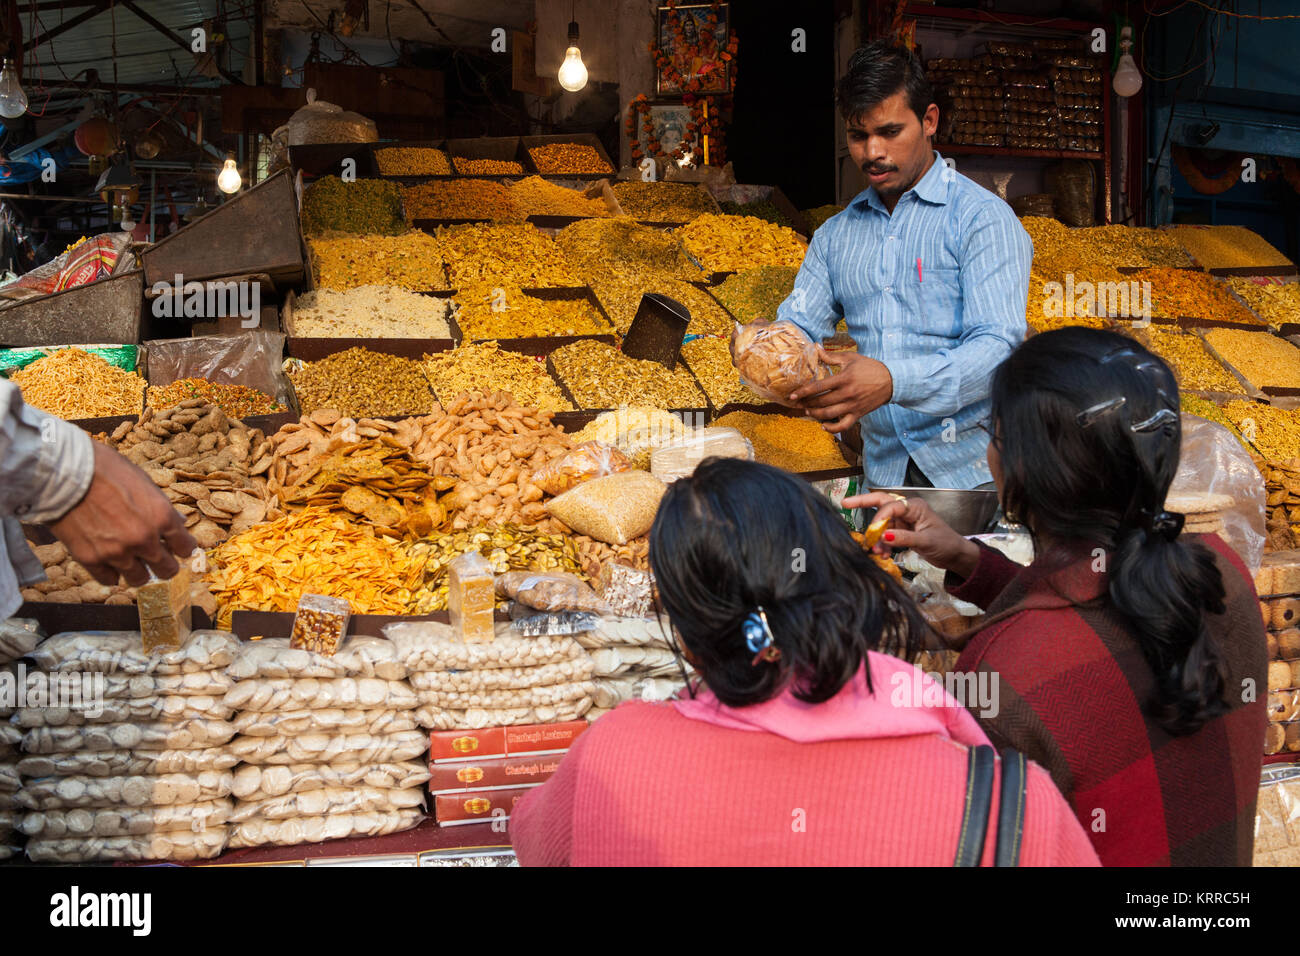 A vendor serves customers at his namkeen (savoury snacks) and sweets stall in Lucknow, India Stock Photo